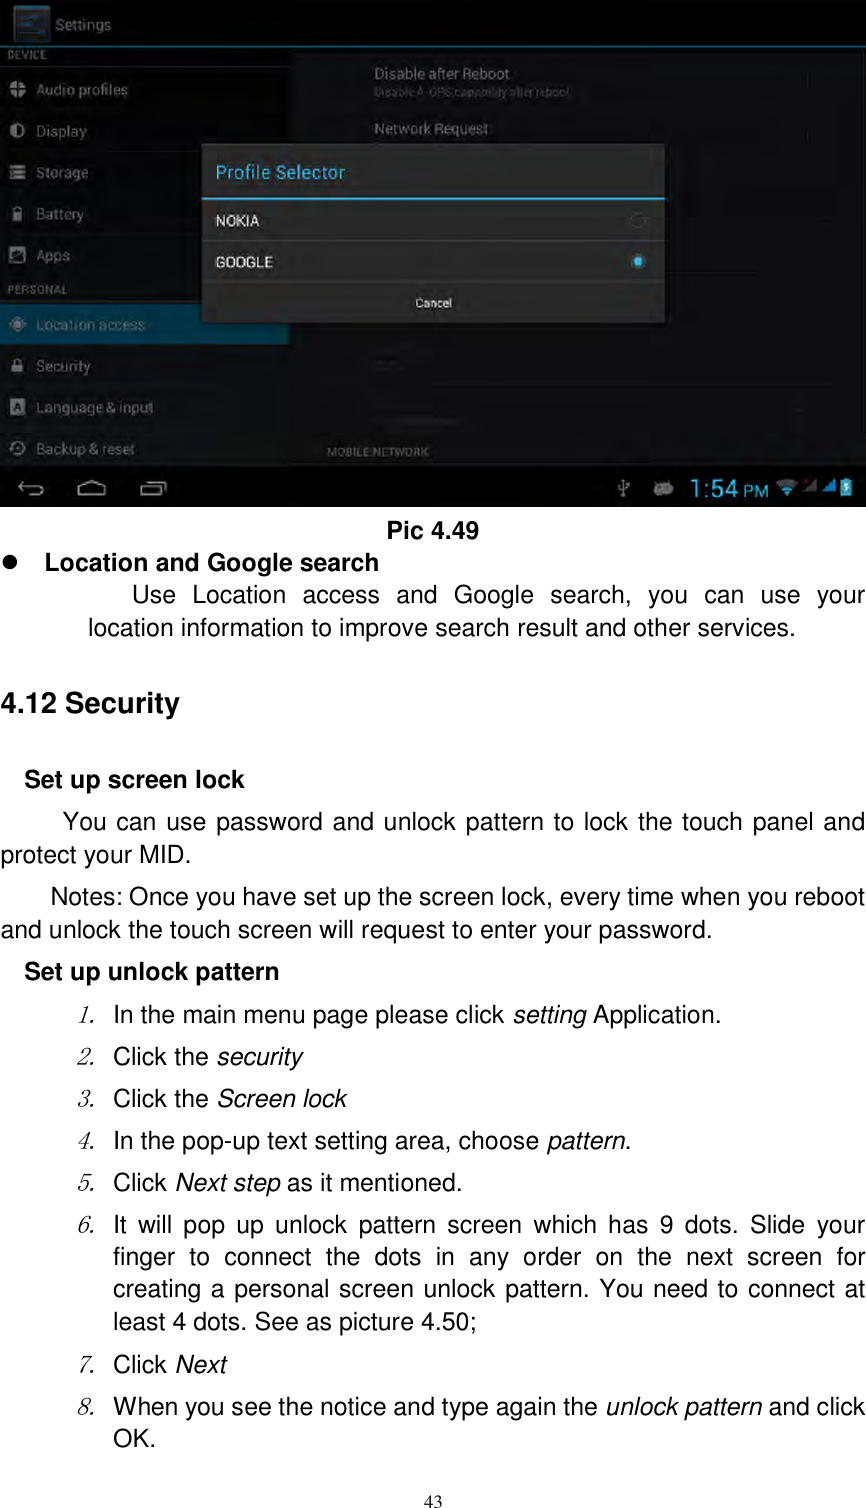      43  Pic 4.49  Location and Google search Use  Location  access  and  Google  search,  you  can  use  your location information to improve search result and other services. 4.12 Security Set up screen lock You can use password and unlock pattern to lock the touch panel and protect your MID. Notes: Once you have set up the screen lock, every time when you reboot and unlock the touch screen will request to enter your password. Set up unlock pattern 1. In the main menu page please click setting Application. 2. Click the security   3. Click the Screen lock 4. In the pop-up text setting area, choose pattern. 5. Click Next step as it mentioned.   6. It  will  pop  up  unlock  pattern  screen  which  has 9  dots.  Slide  your finger  to  connect  the  dots  in  any  order  on  the  next  screen  for creating a personal screen unlock pattern. You need to connect at least 4 dots. See as picture 4.50; 7. Click Next 8. When you see the notice and type again the unlock pattern and click OK. 